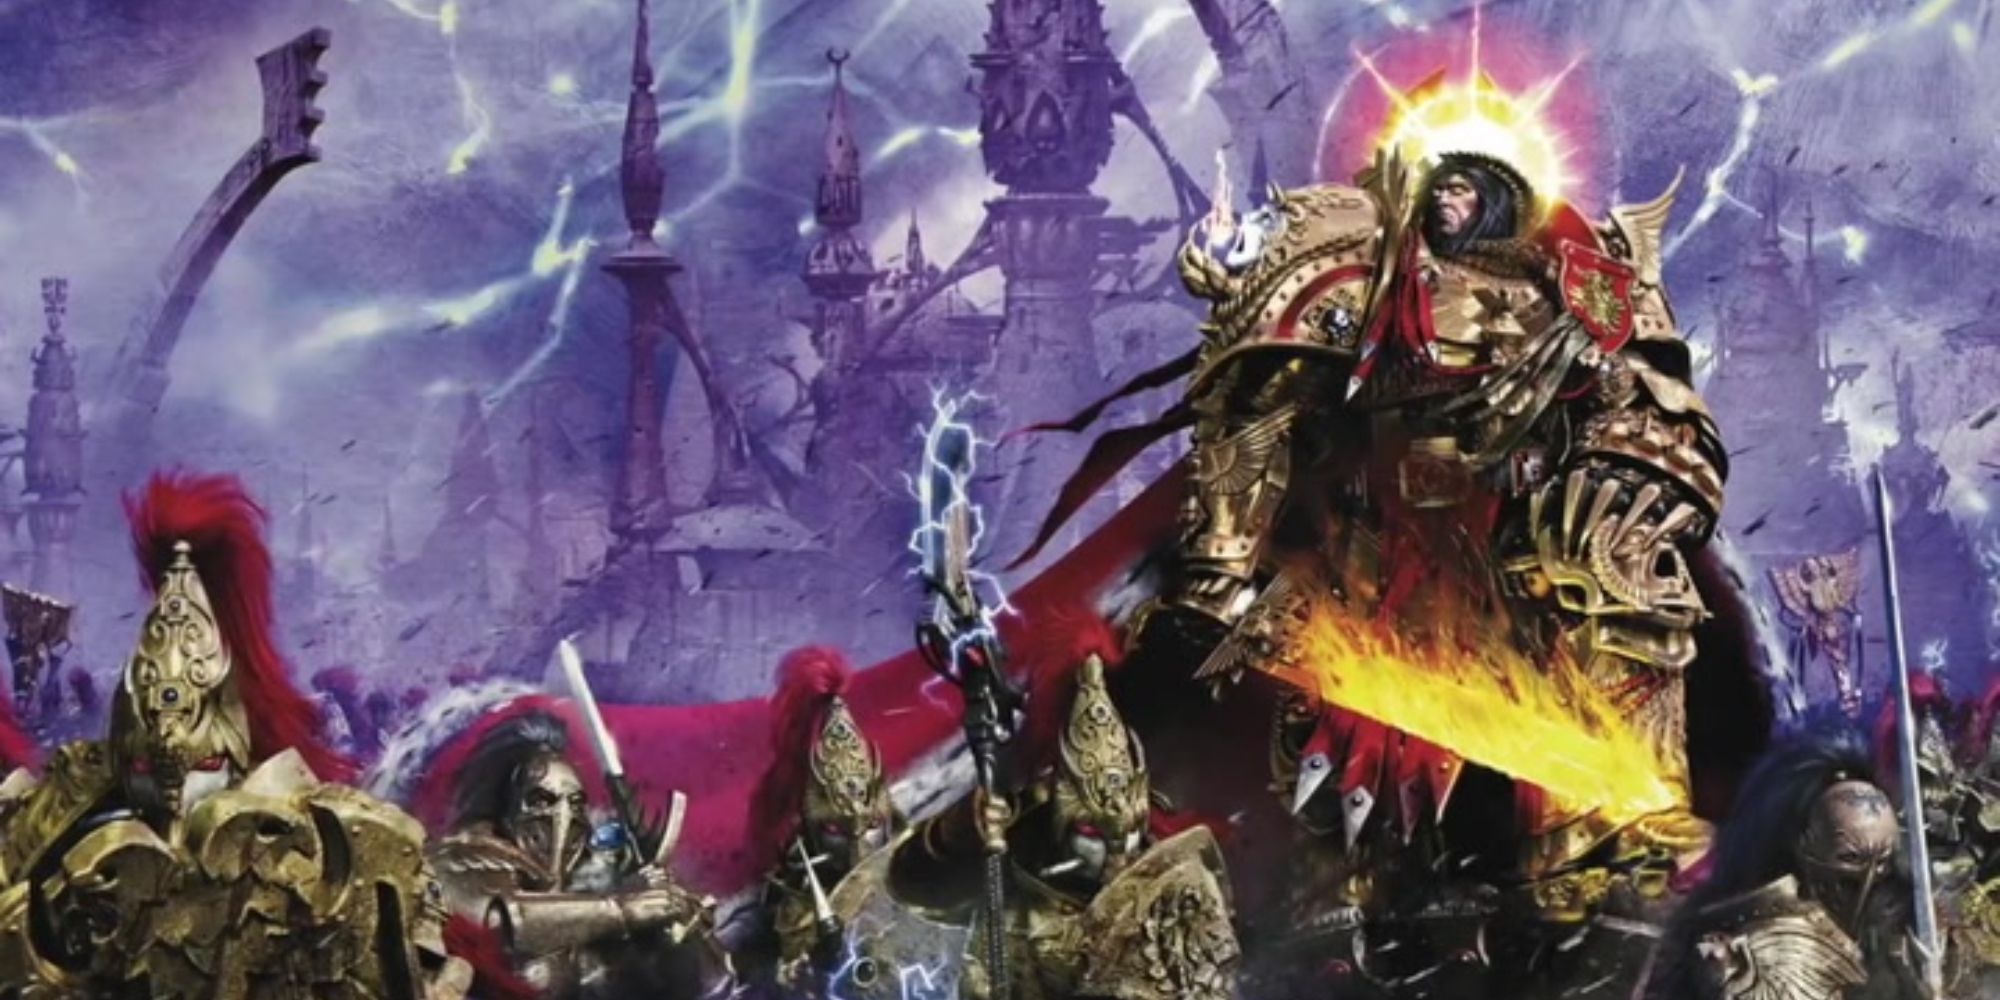 The Emperor and Custodes in Warhammer 40K's Imperial Webway.